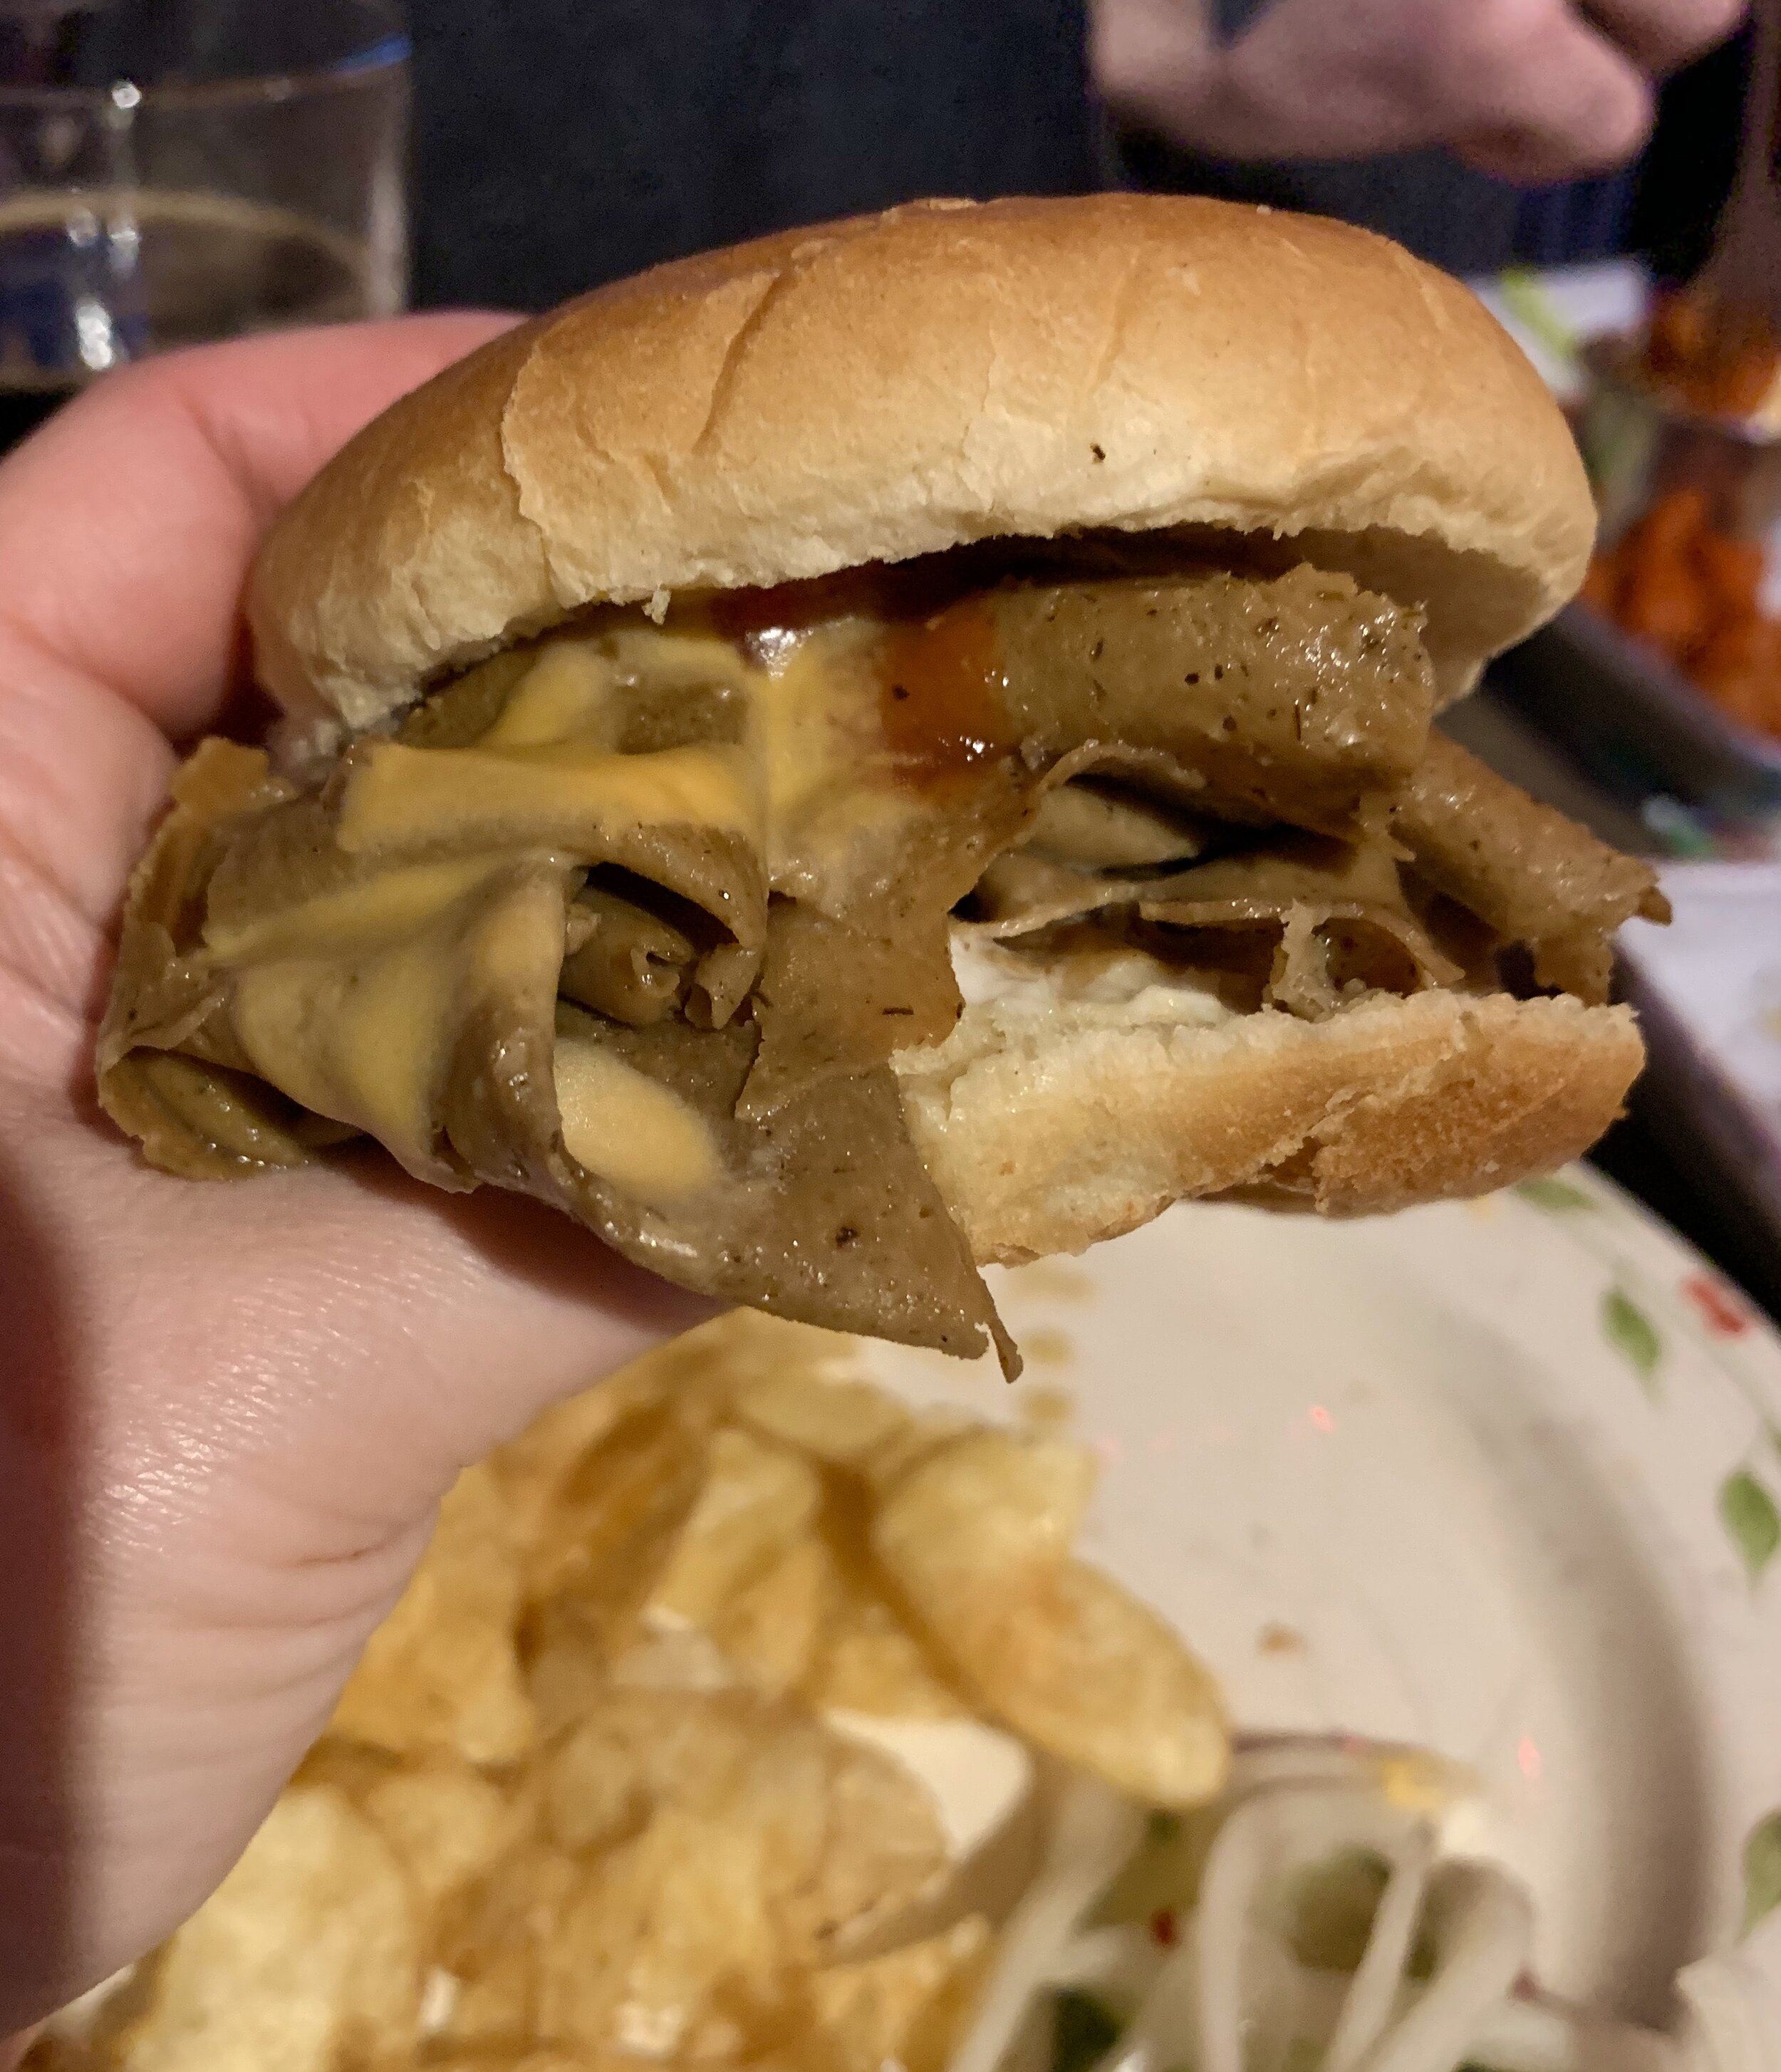 A sandwich with thinly sliced seitan, meant to mimic an Arby's roast beef sandwich.